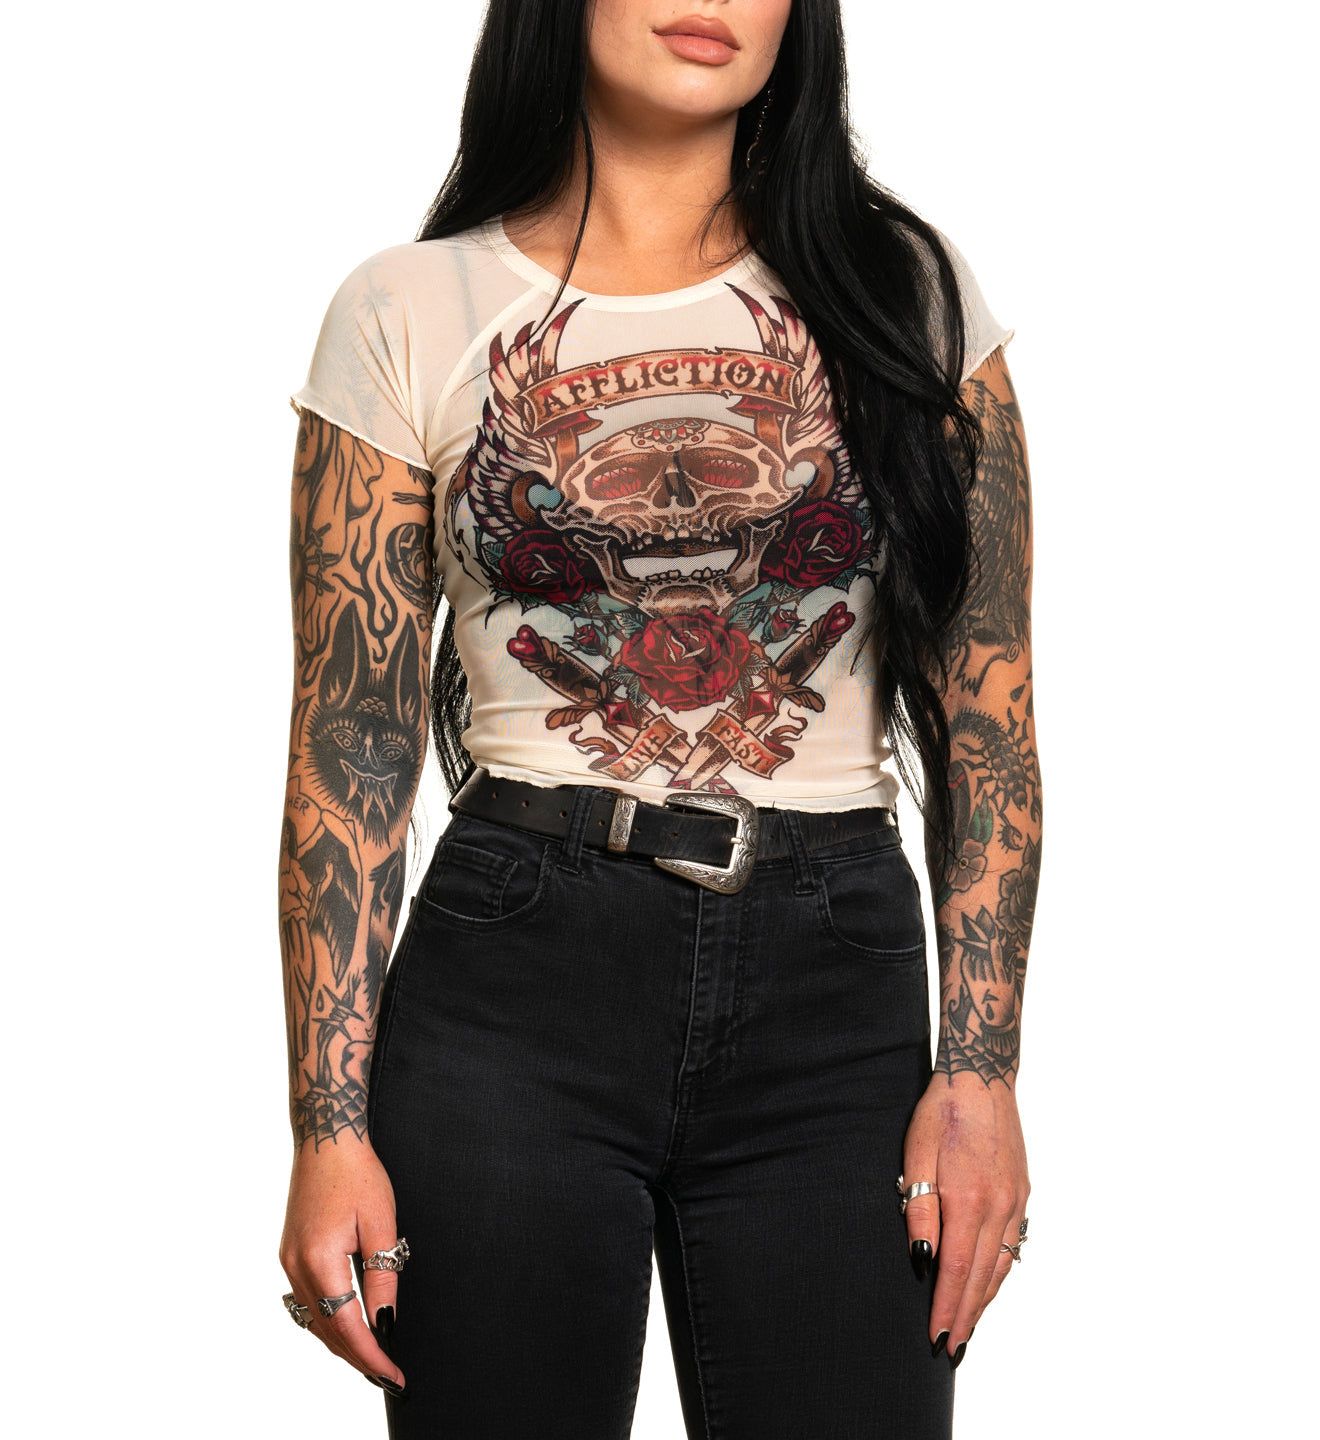 Screamin Roses - Affliction Clothing